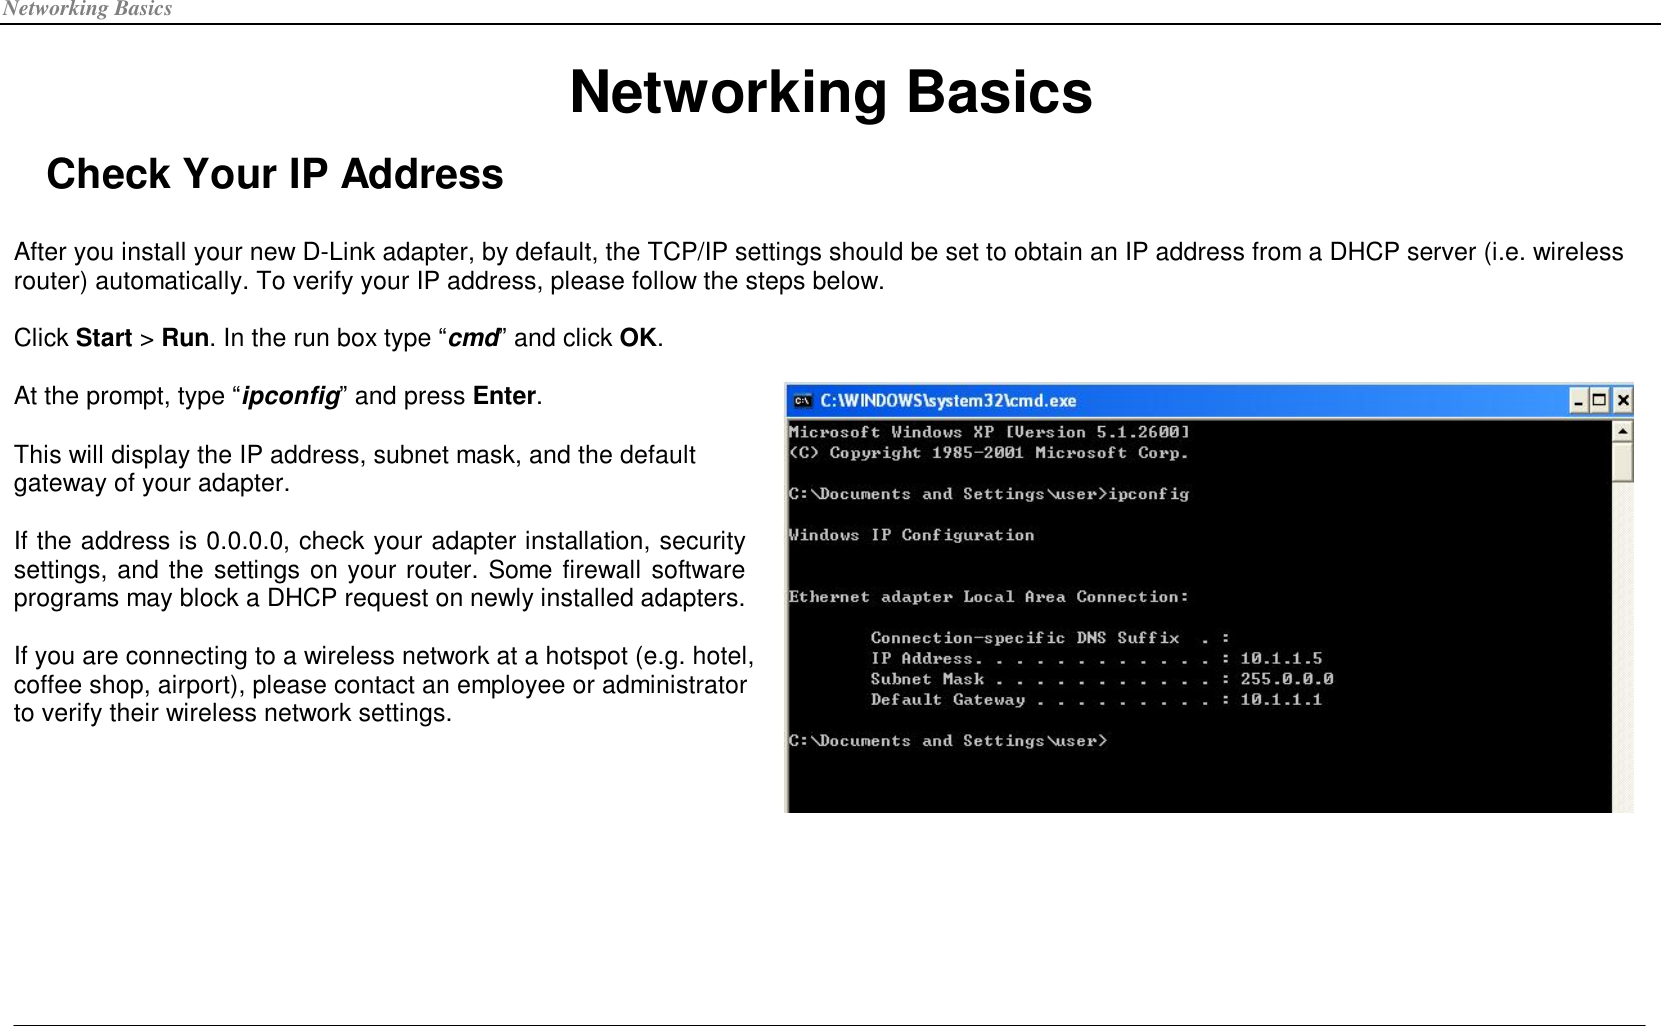 Networking Basics Networking Basics Check Your IP Address  After you install your new D-Link adapter, by default, the TCP/IP settings should be set to obtain an IP address from a DHCP server (i.e. wireless router) automatically. To verify your IP address, please follow the steps below.  Click Start &gt; Run. In the run box type “cmd” and click OK. At the prompt, type “ipconfig” and press Enter. This will display the IP address, subnet mask, and the default gateway of your adapter.  If the address is 0.0.0.0, check your adapter installation, security settings, and the settings on your router. Some firewall software programs may block a DHCP request on newly installed adapters.  If you are connecting to a wireless network at a hotspot (e.g. hotel, coffee shop, airport), please contact an employee or administrator to verify their wireless network settings.  